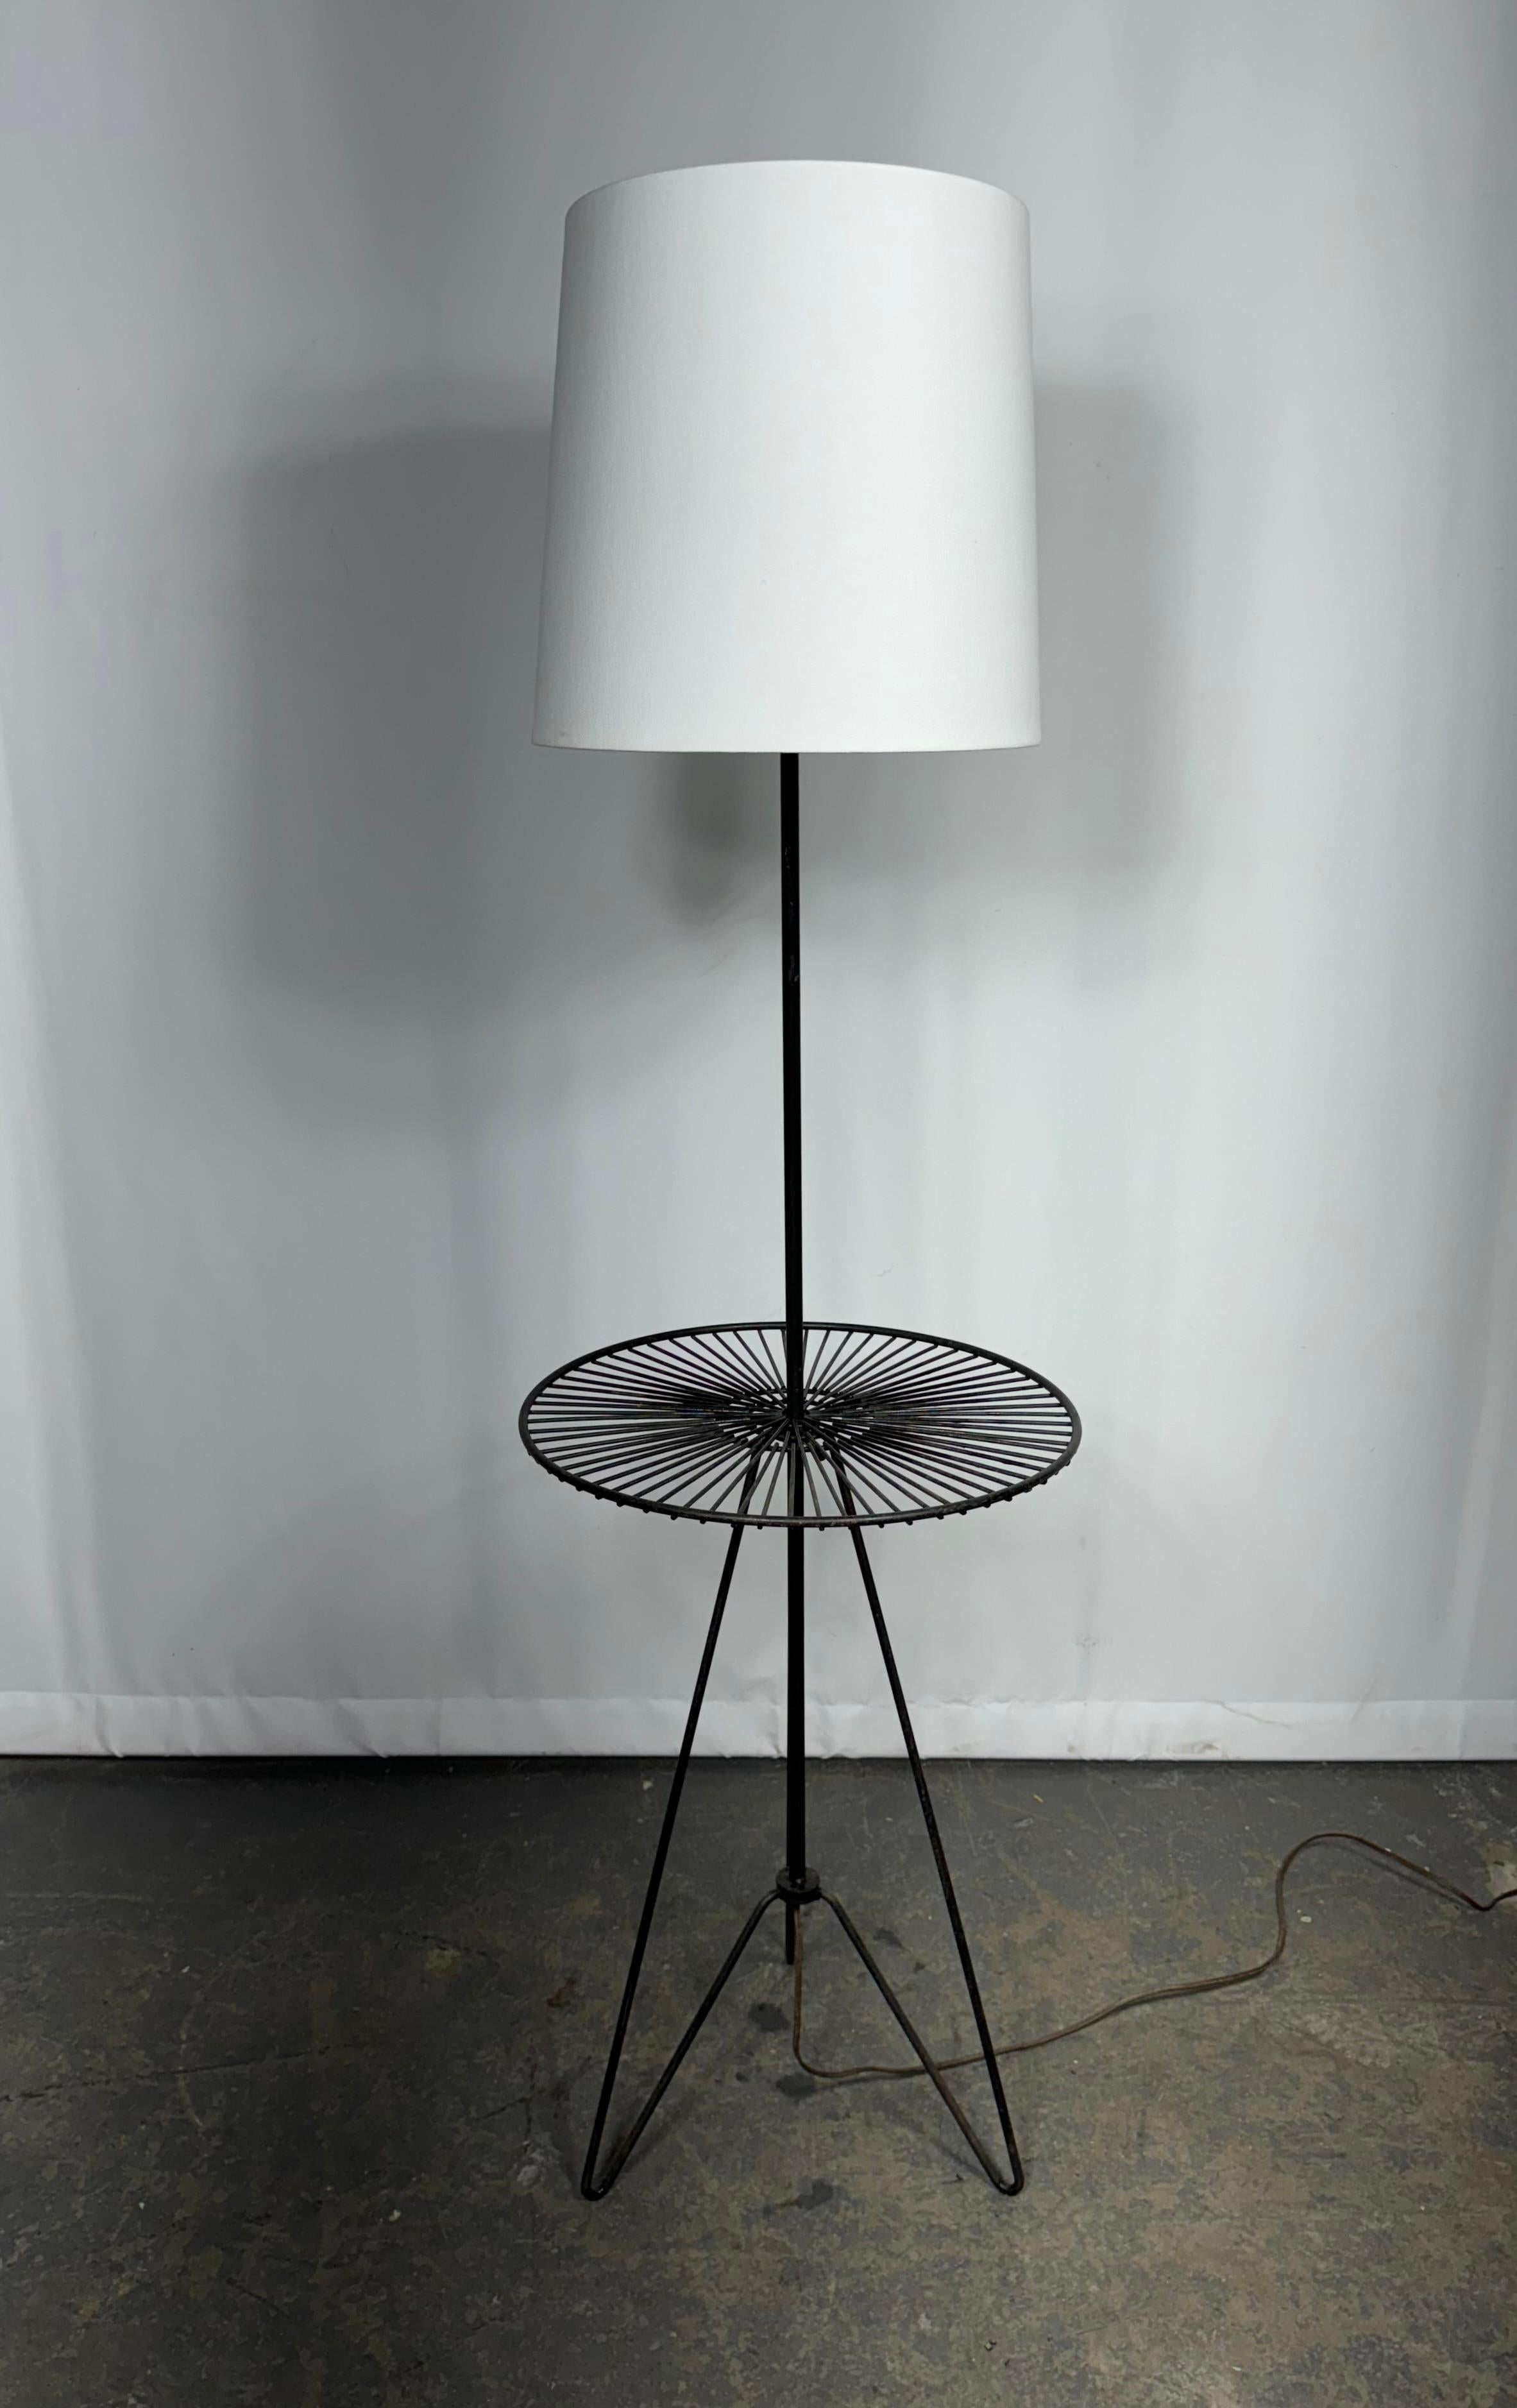 Tony Paul Black Wrought Iron and Black Wire Side Table and Floor Lamp. Featuring a Black Wrought Iron stem, round rimmed Black enameled wire surface on balanced tripod hairpin legs. Shade shown for display only. Sturdy. Lightweight. American